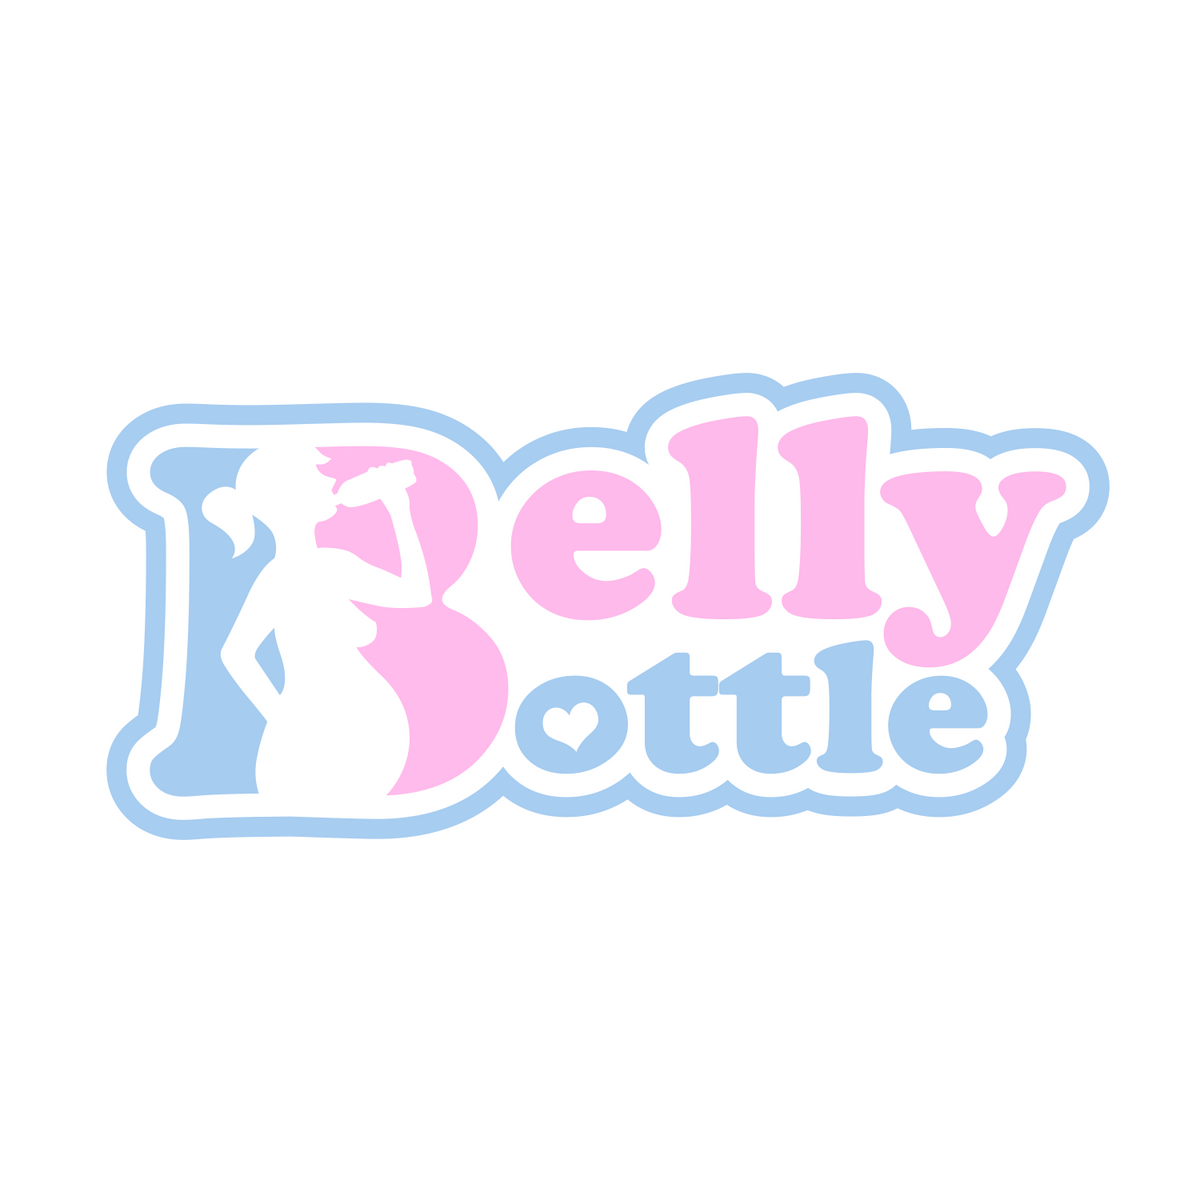 Pending collection - Pregnancy water bottle (unused), in Dunfermline, Fife